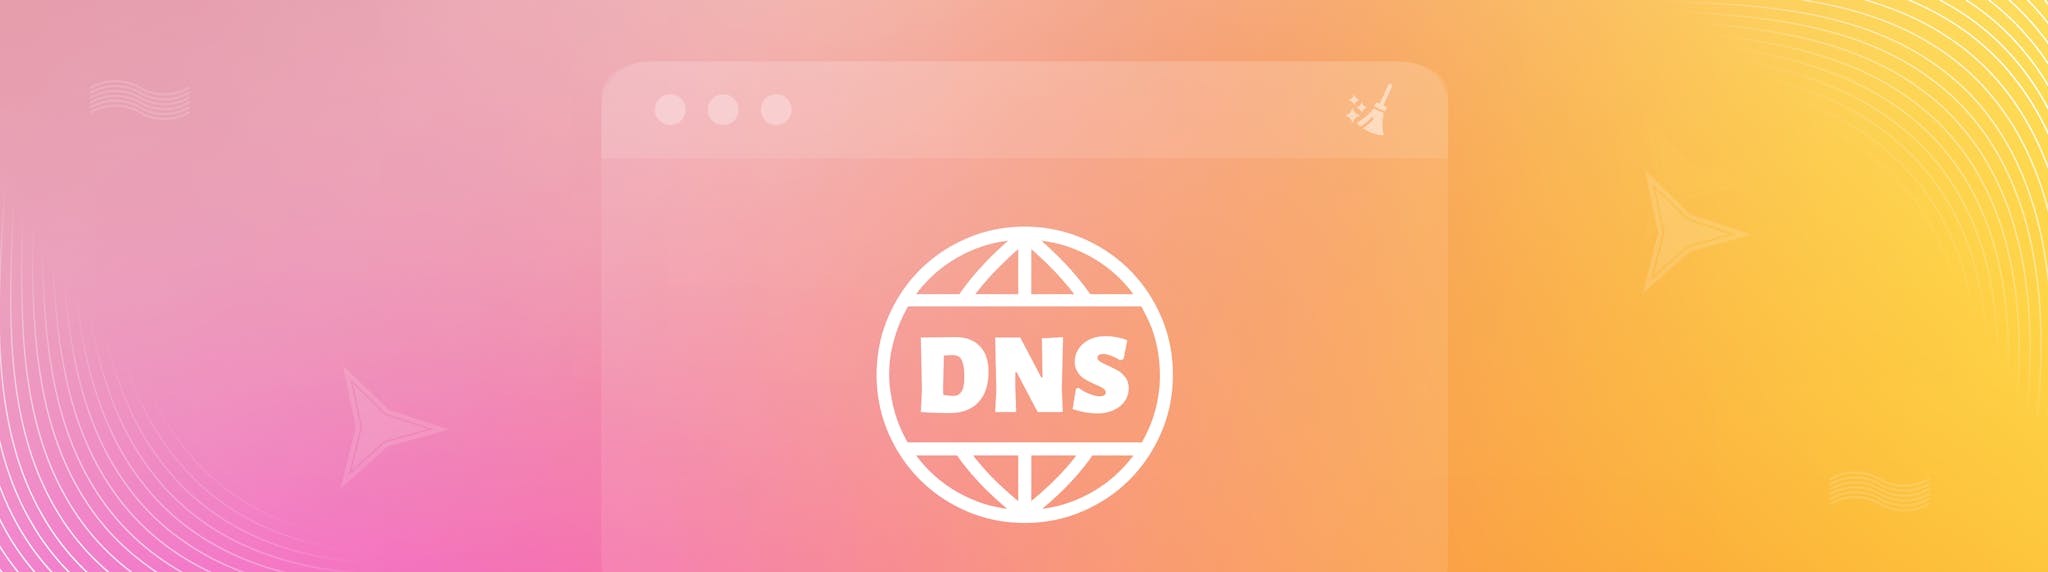 Chrome.//Net-Internals/#DNS: How to Clear DNS Cache on Chrome [Updated]